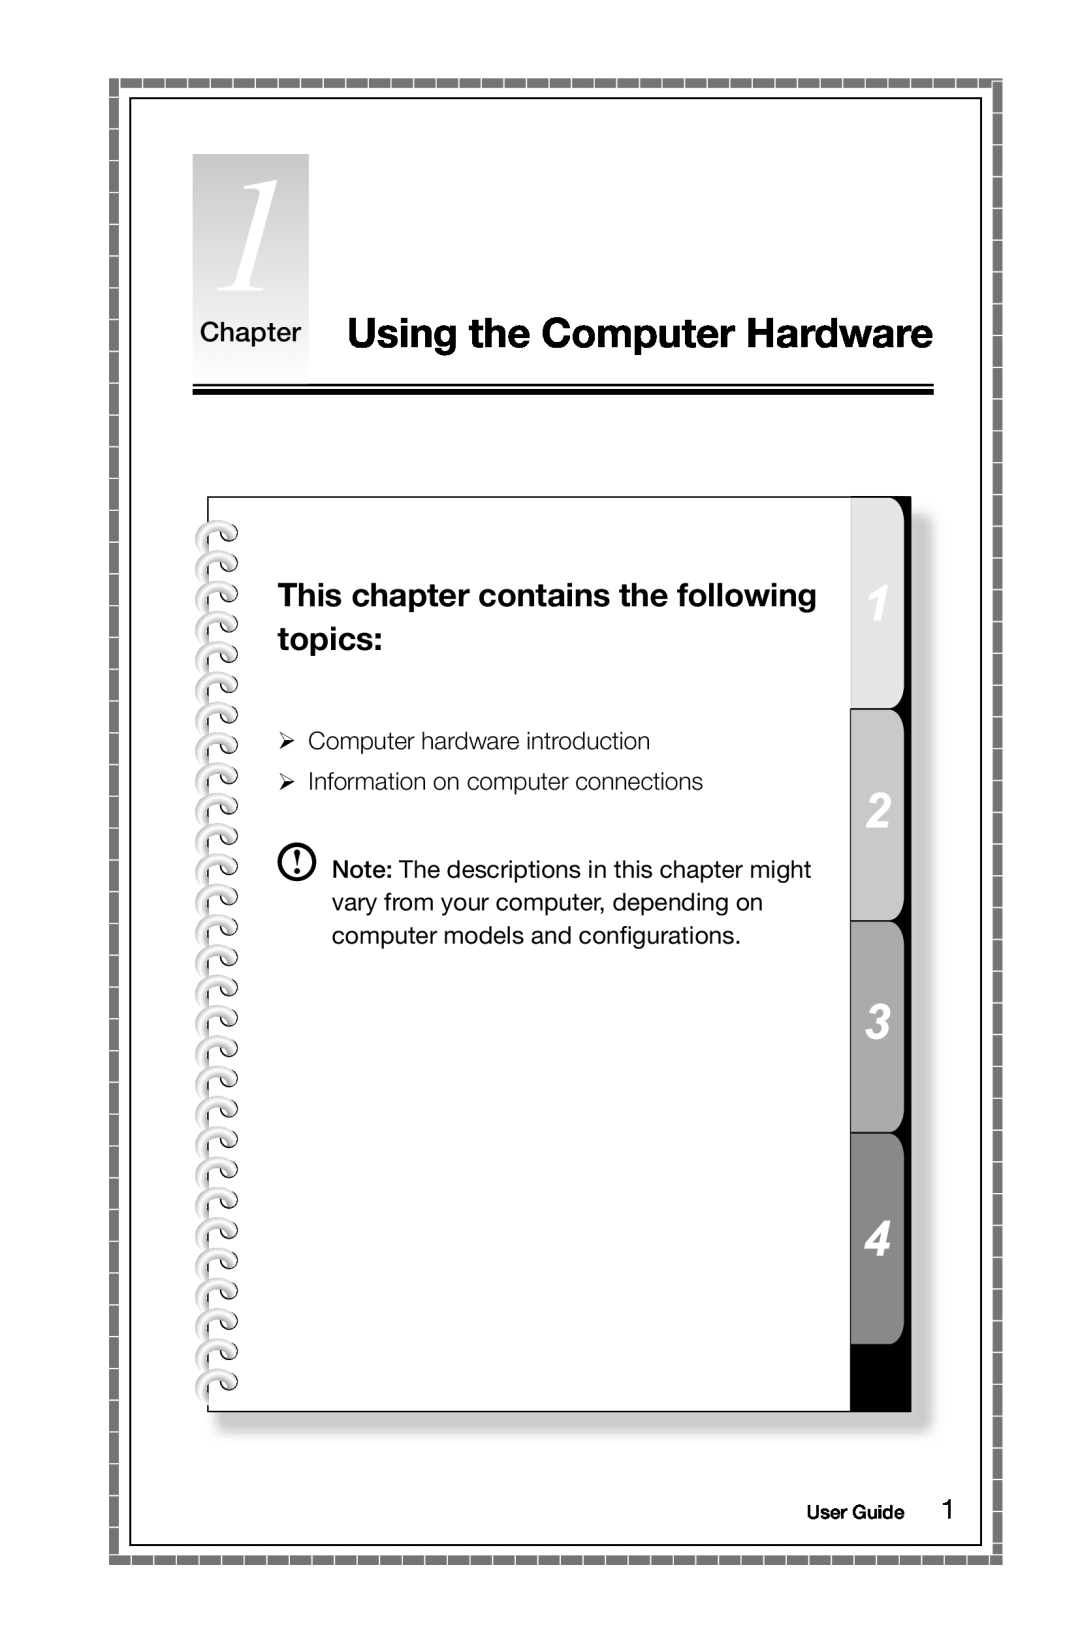 Lenovo 10060/7724, 10068/7752 Chapter Using the Computer Hardware, This chapter contains the following topics, User Guide 